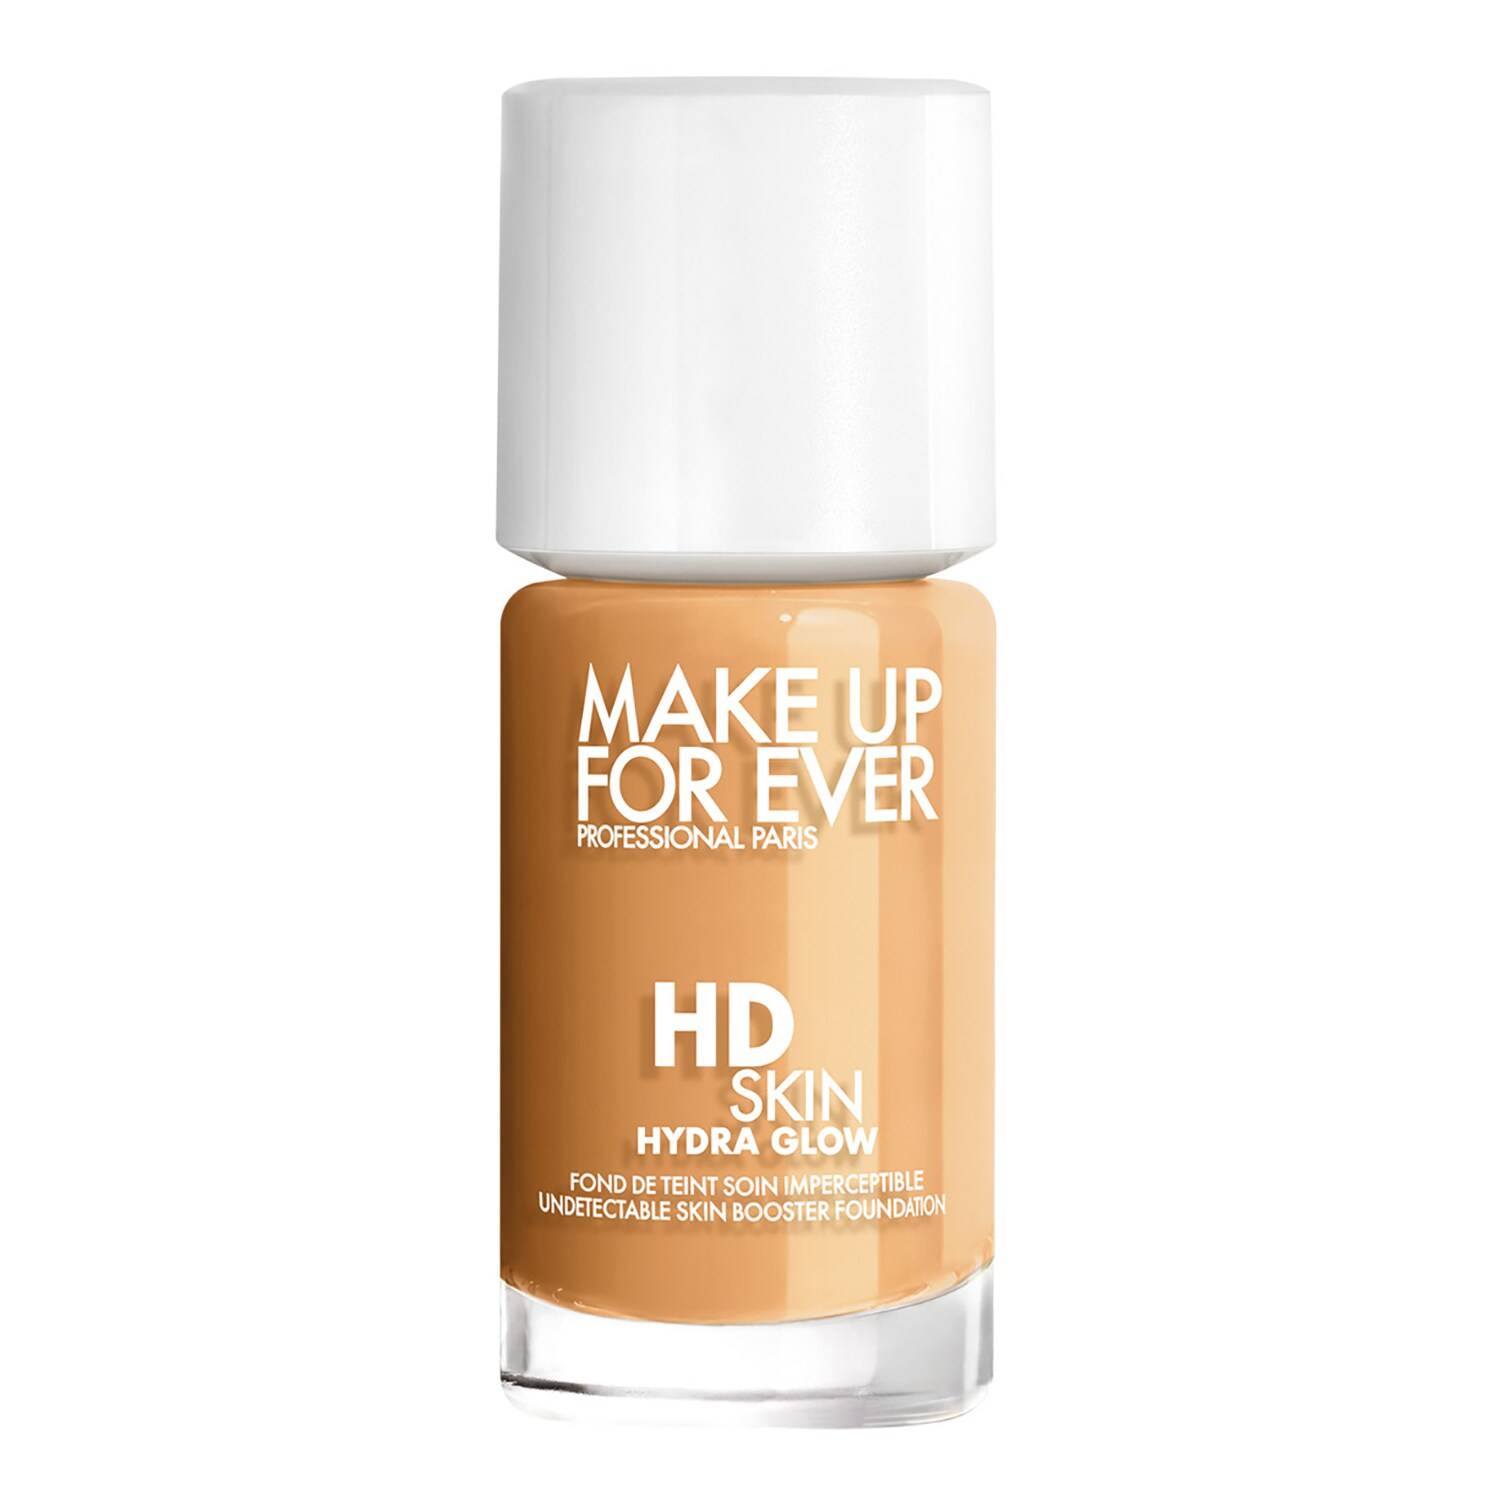 Make Up For Ever Hd Skin Hydra Glow Foundation 30Ml 3R48